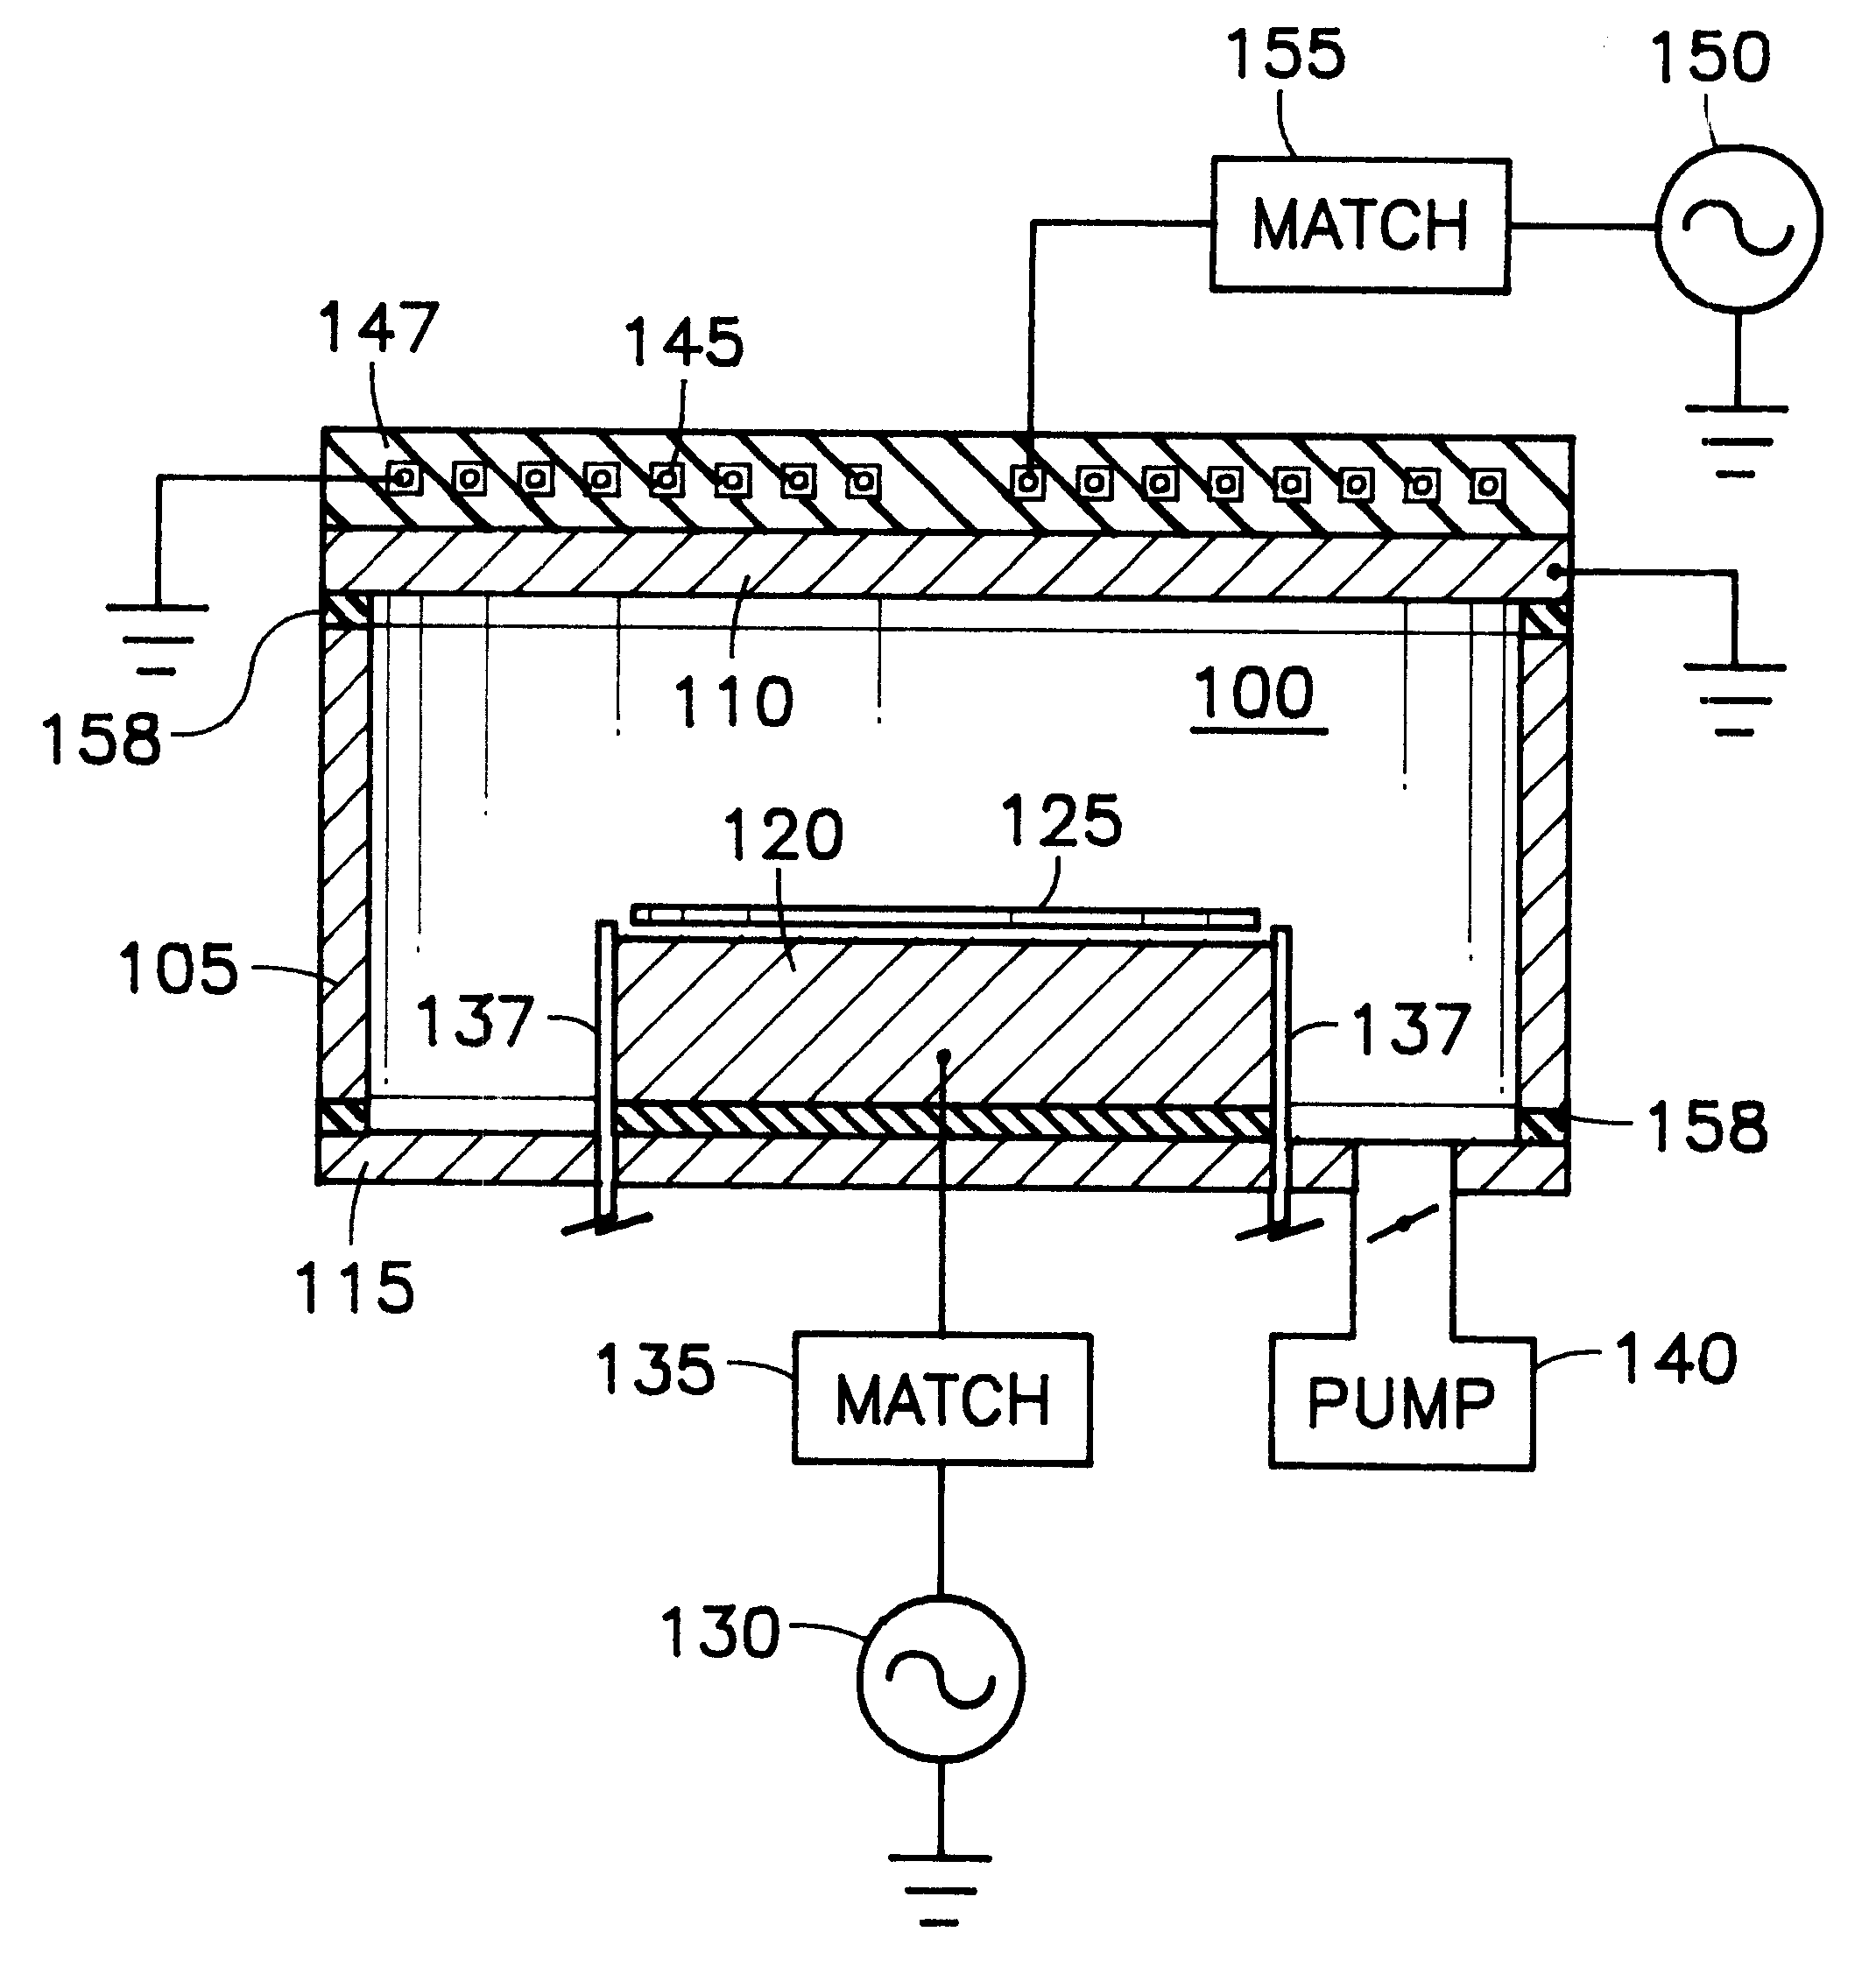 Parallel-plate electrode reactor having an inductive antenna coupling power through a parallel plate electrode